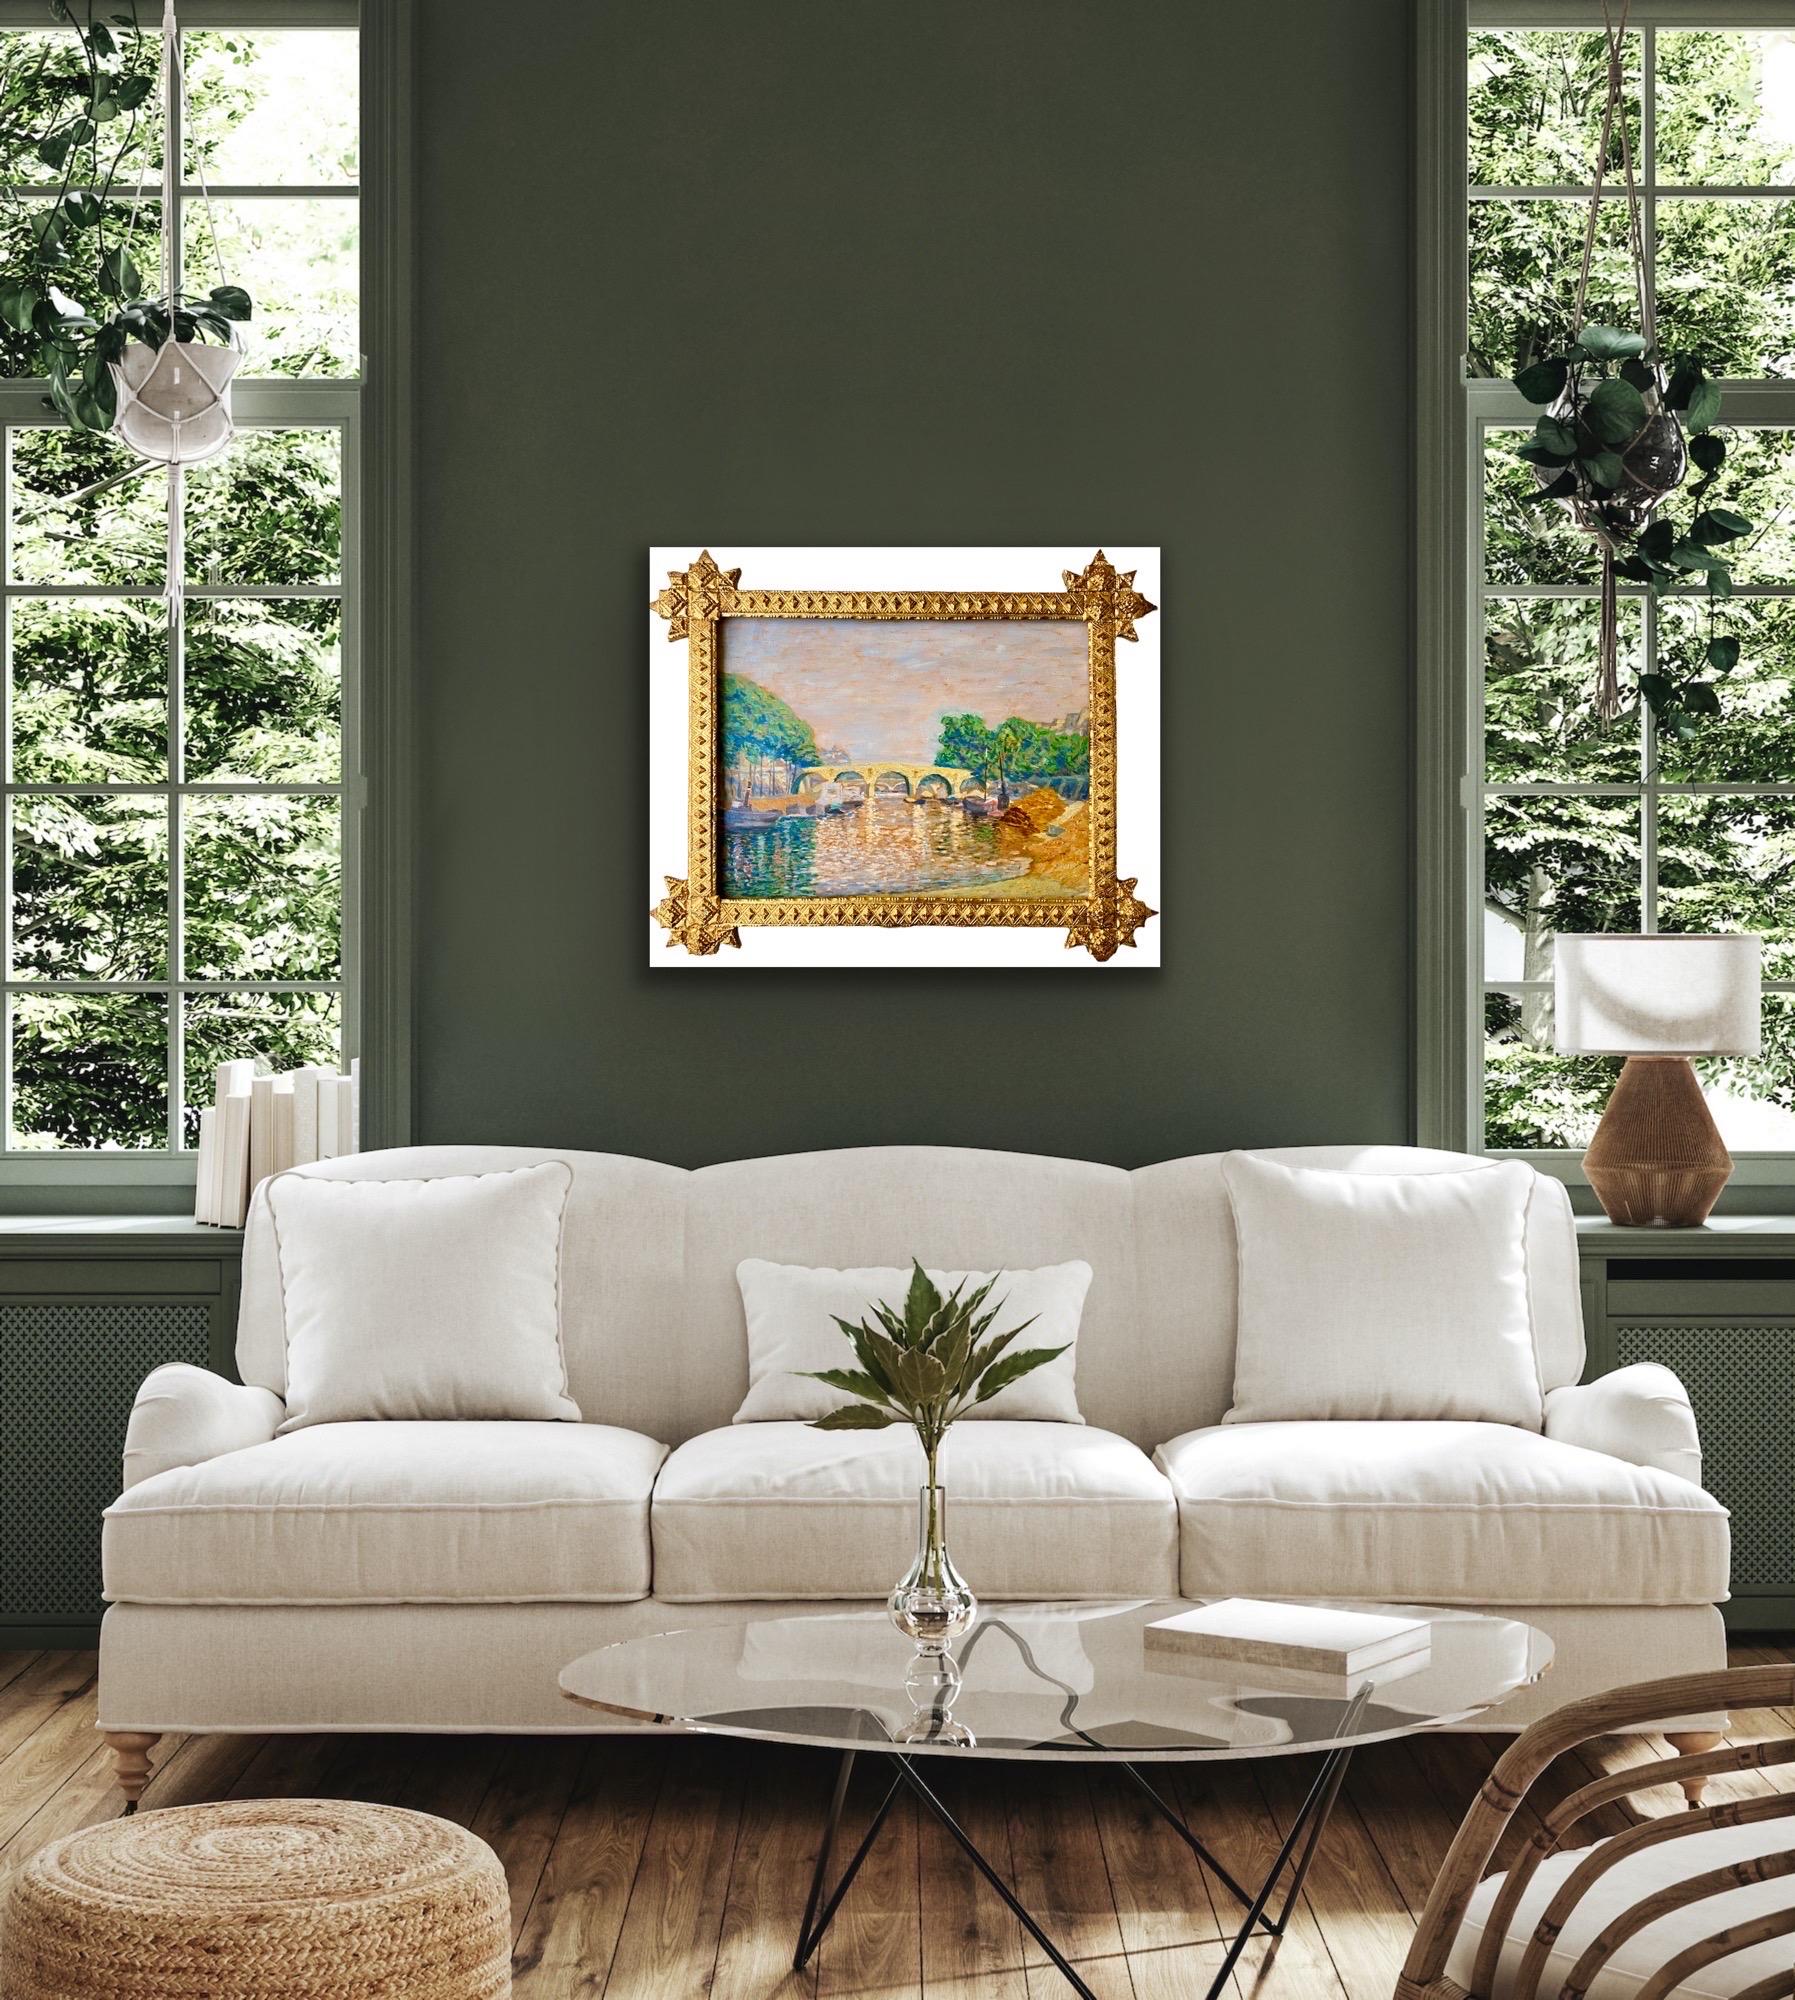 Wonderful and vibrant French impressionist painting depicting a river (likely the Seine in Paris) on a sunny summer day. Housed in an antique frame of the period. Painted with swift and confident brush-strokes this work marvellously captures the